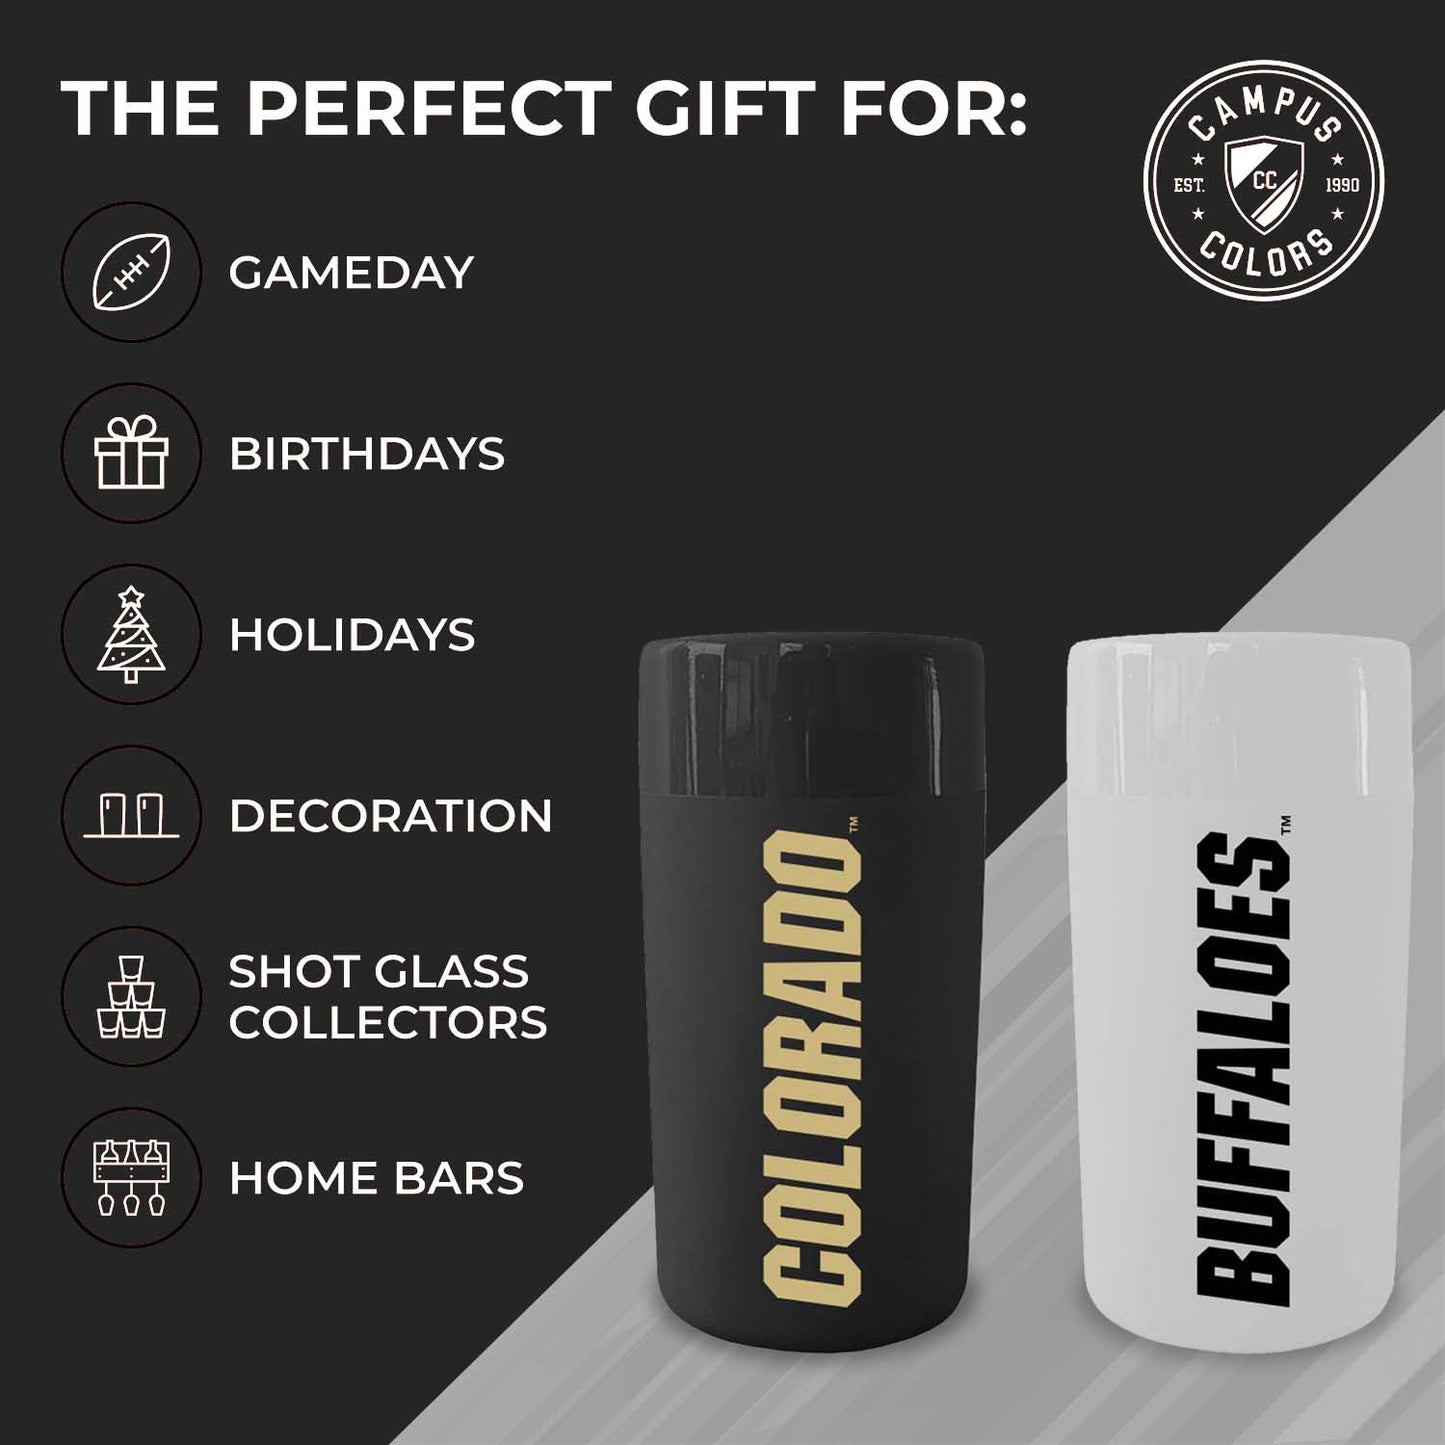 Colorado Buffaloes College and University 2-Pack Shot Glasses - Team Color